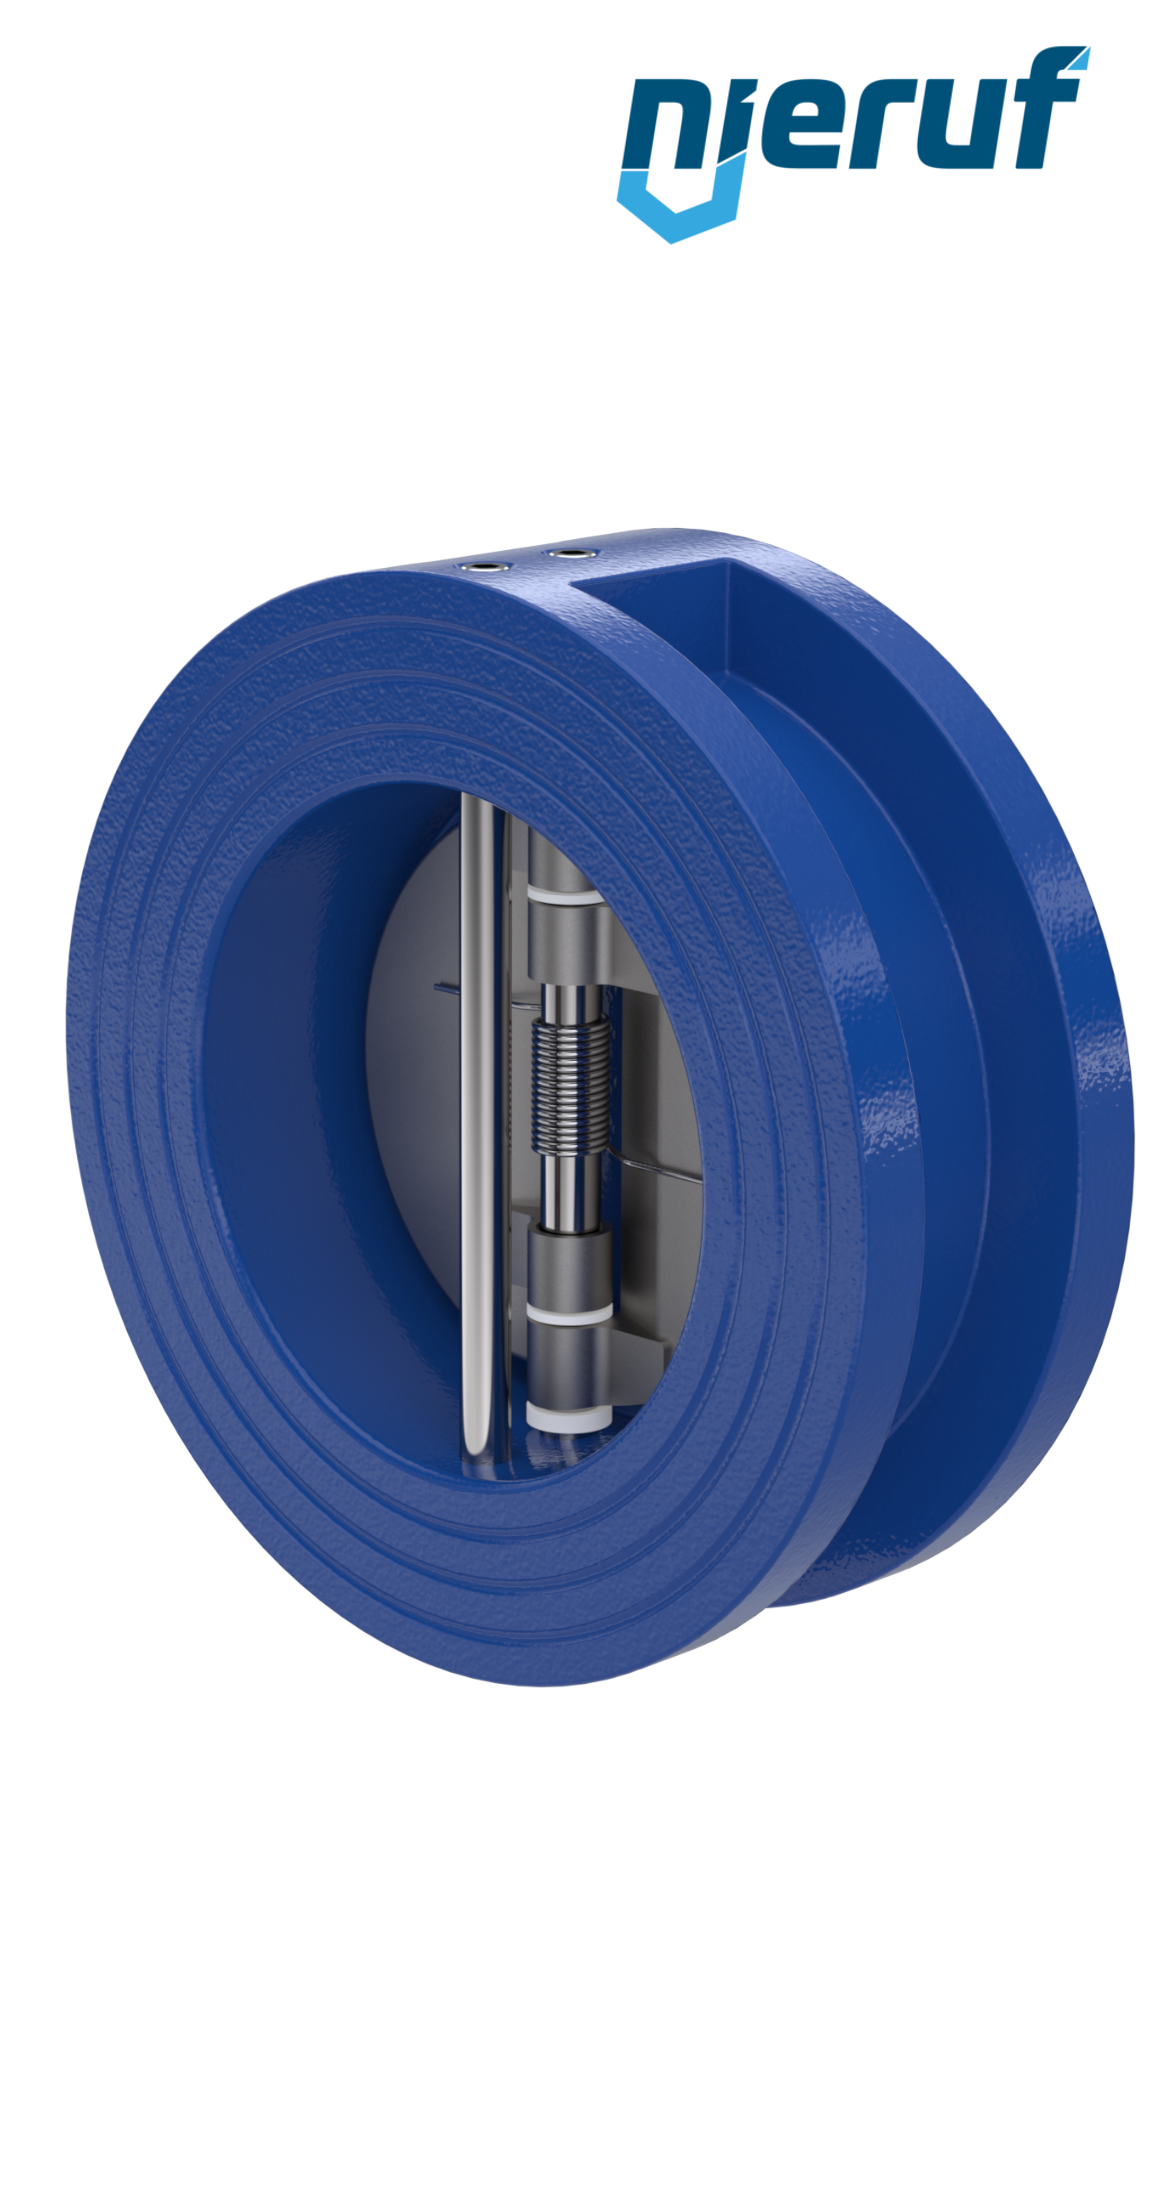 dual plate check valve DN65 DR02 GGG40 epoxyd plated blue 180µm EPDM